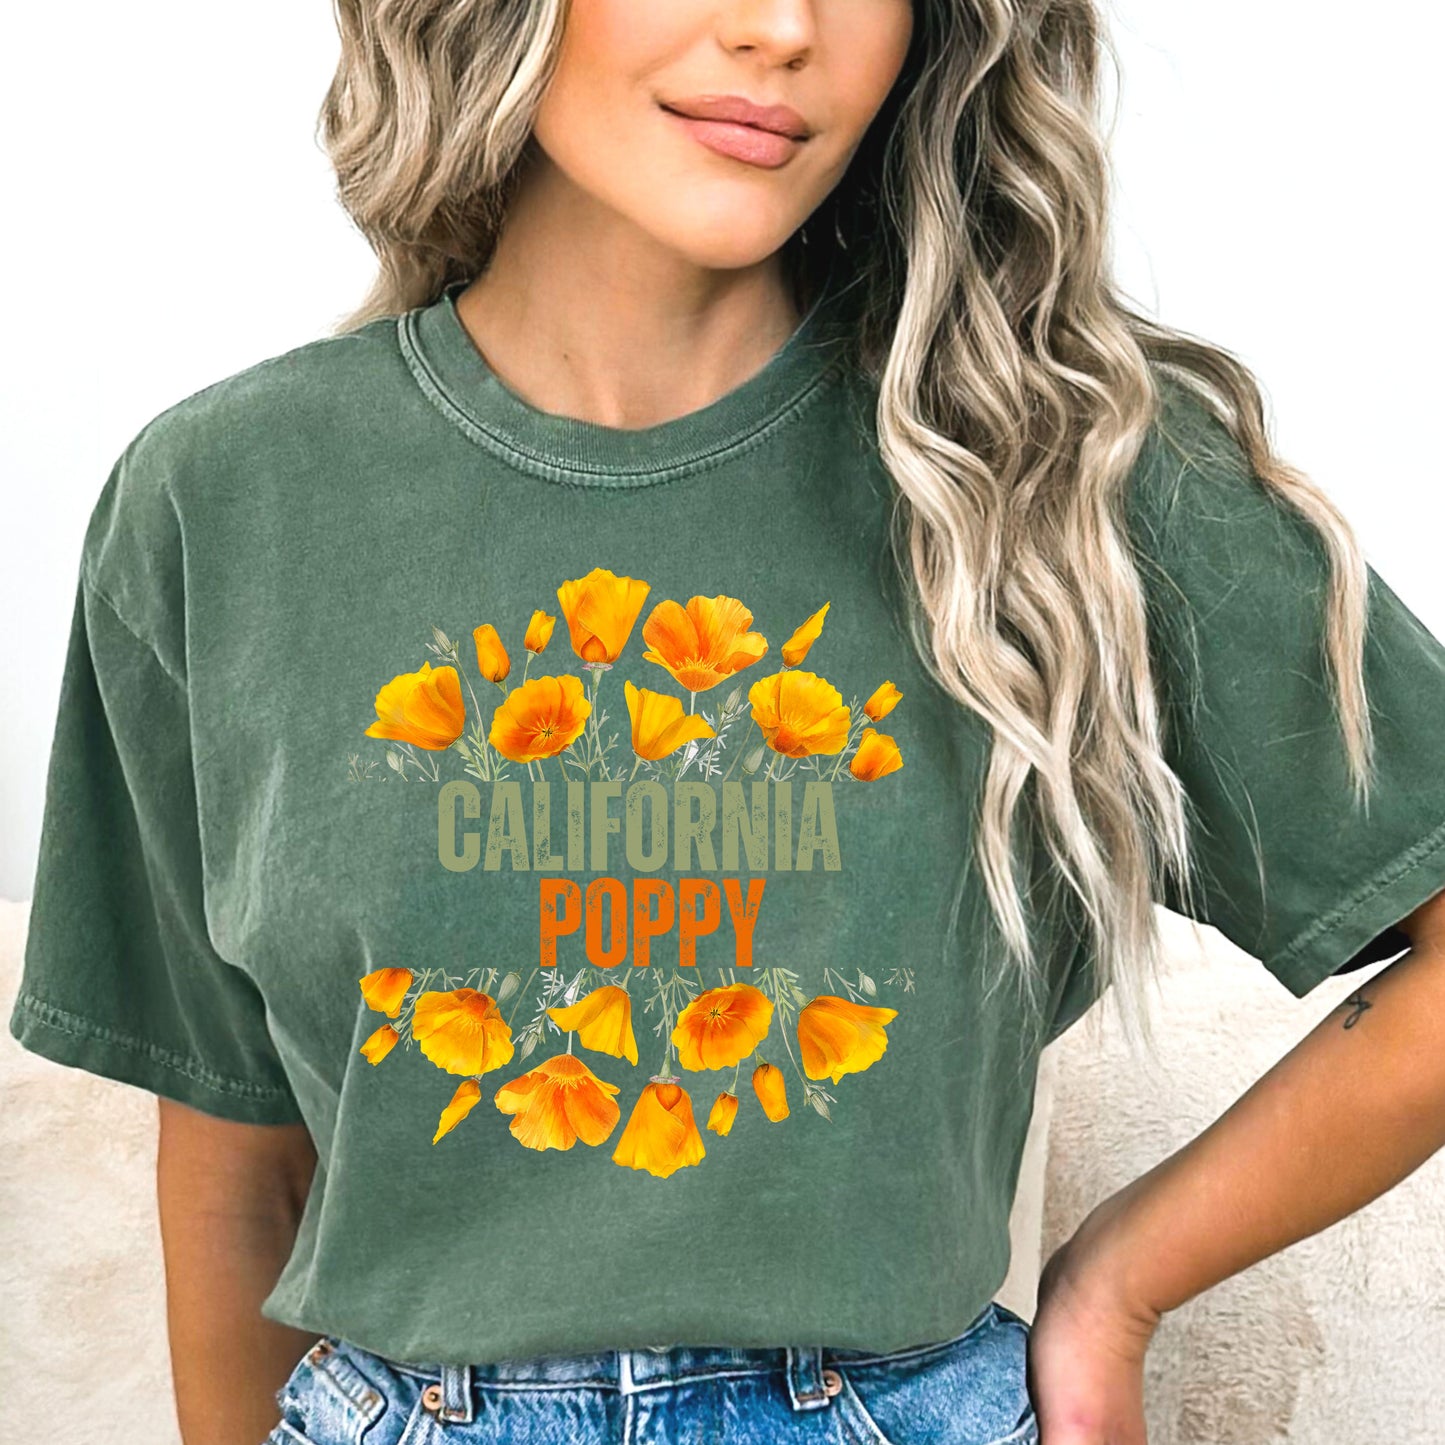 Beautiful California Poppy State Flower Garment-Dyed T-shirt, California Poppy Shirt, State Flower Tshirt, Gifts For Her, Gifts For Women